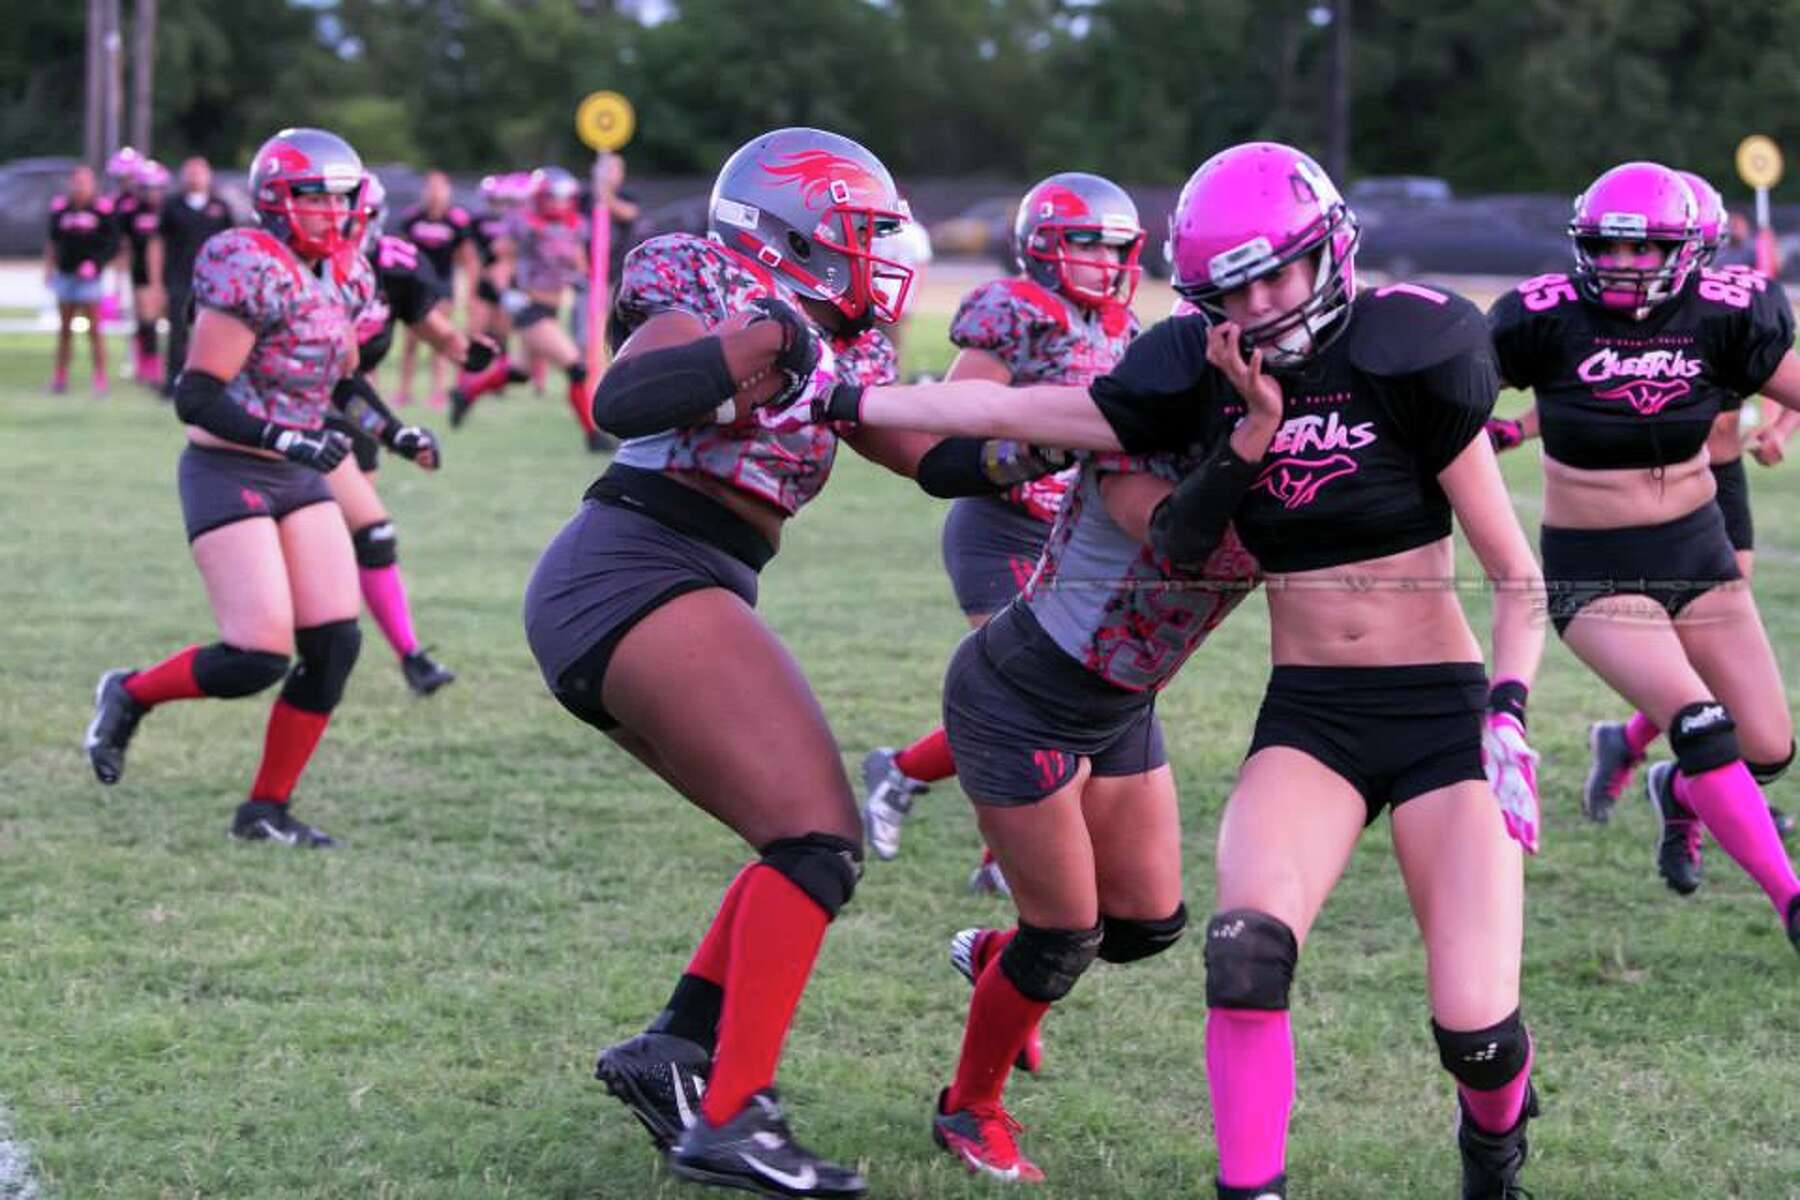 9 Easy Ways To Cincinnati Sizzle 2016 USWFL Champs! Without Even Thinking About It